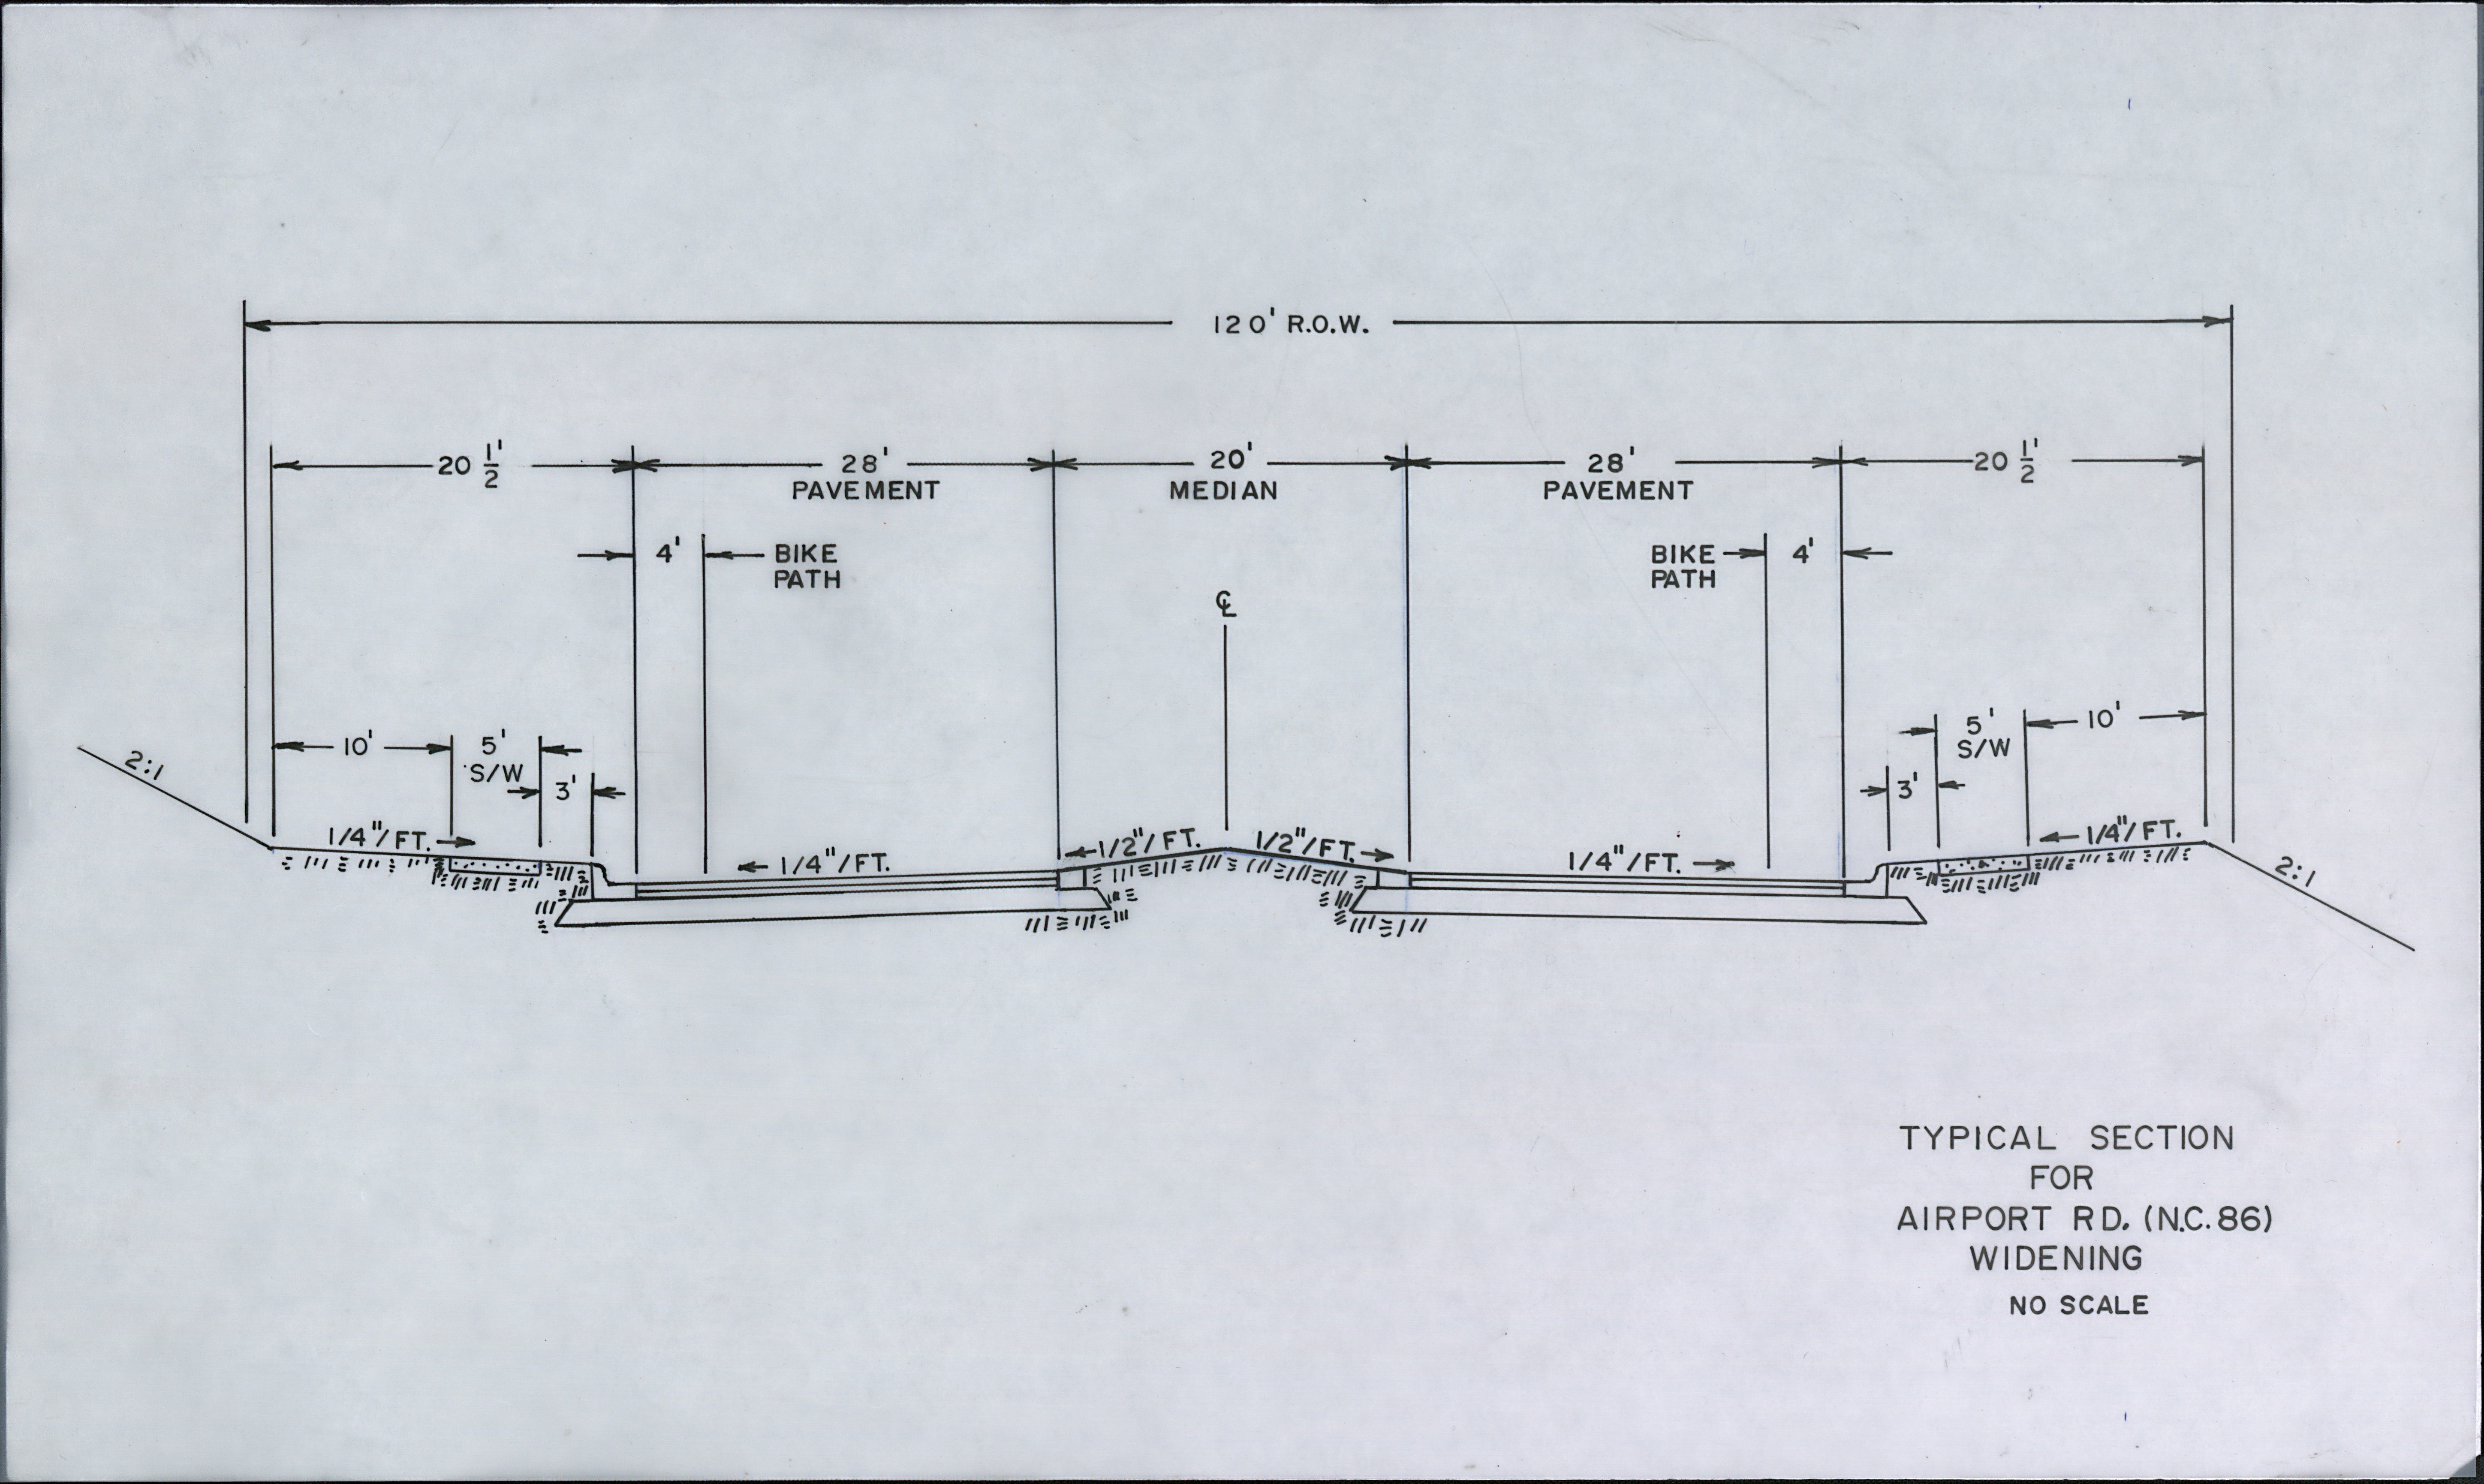 Plans for widening Airport Road (NC86)